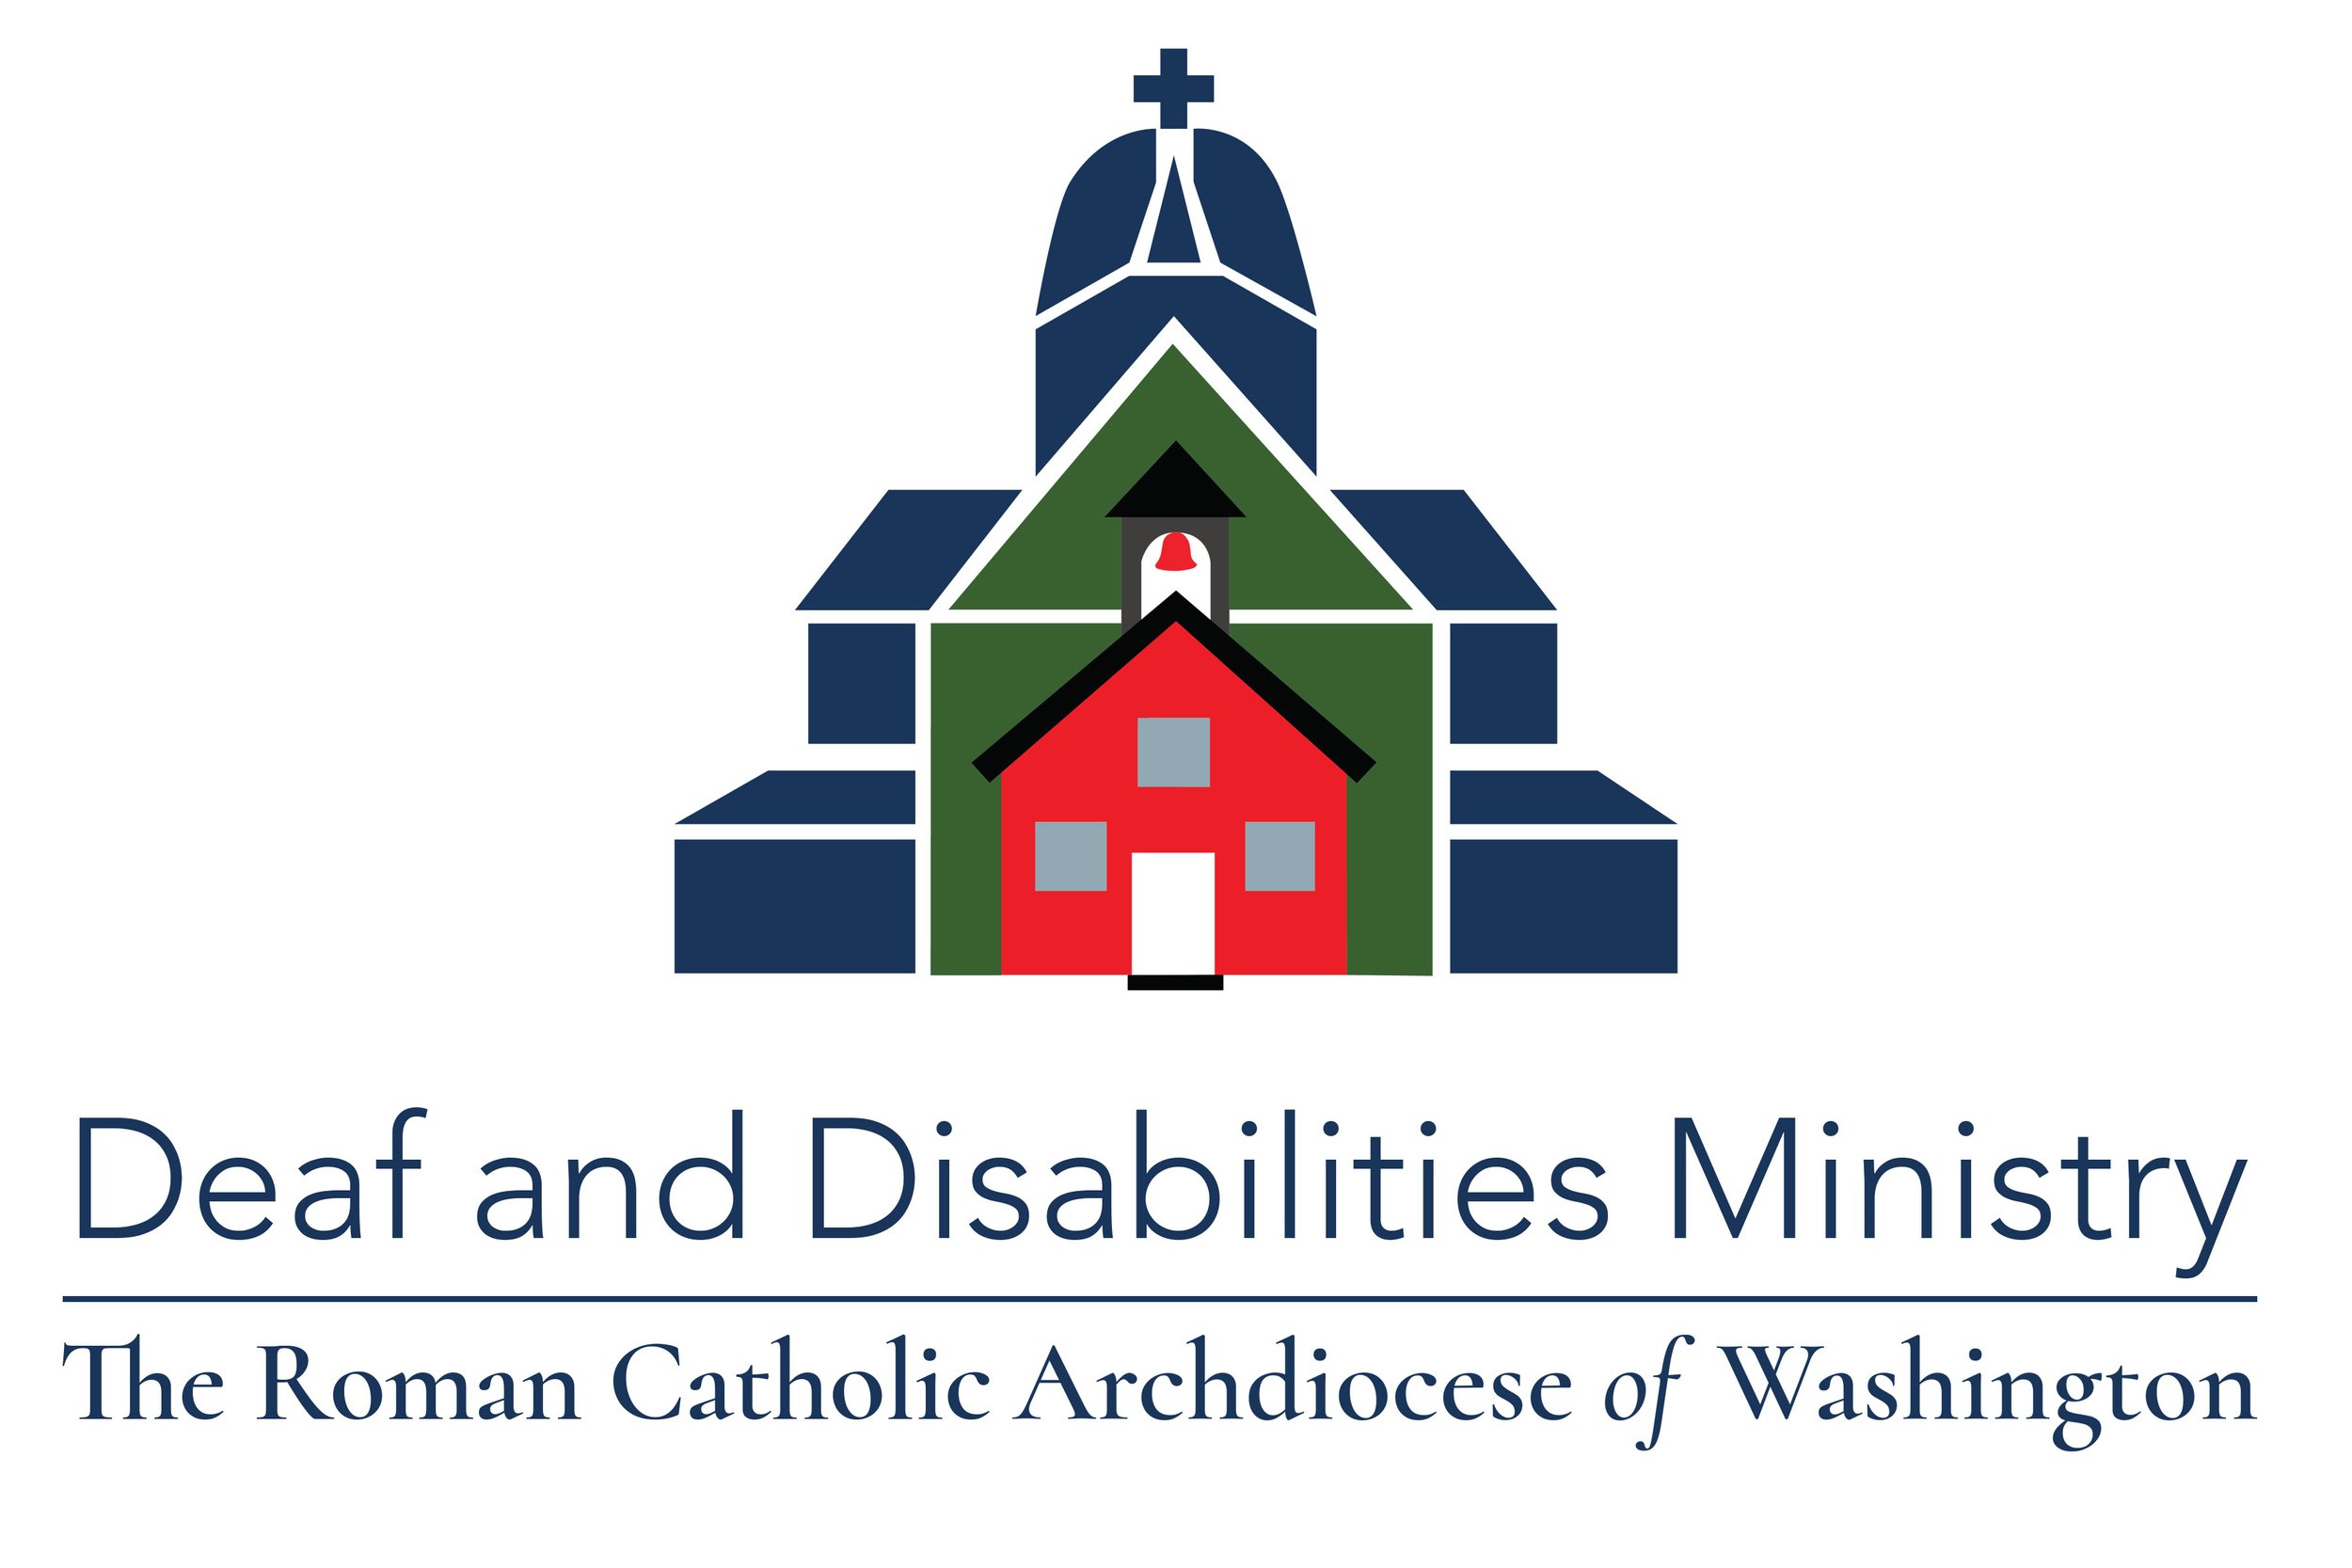 Archdiocese of Washington Deaf and Disability Ministry